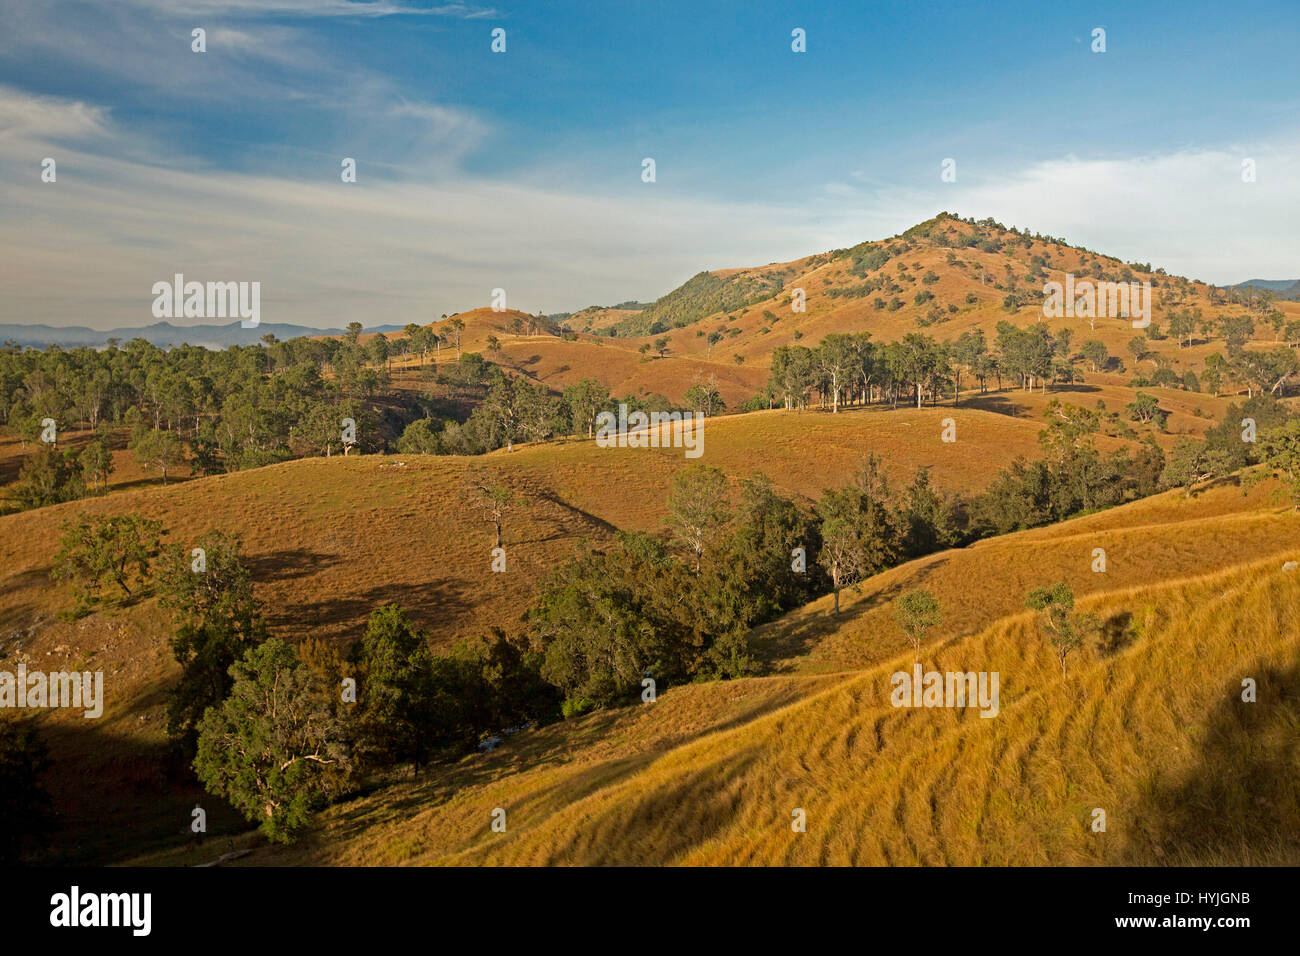 Vast rural landscape in winter with rolling hills with golden grasses, scattered trees, ranges on horizon under blue sky in northern NSW Australia Stock Photo